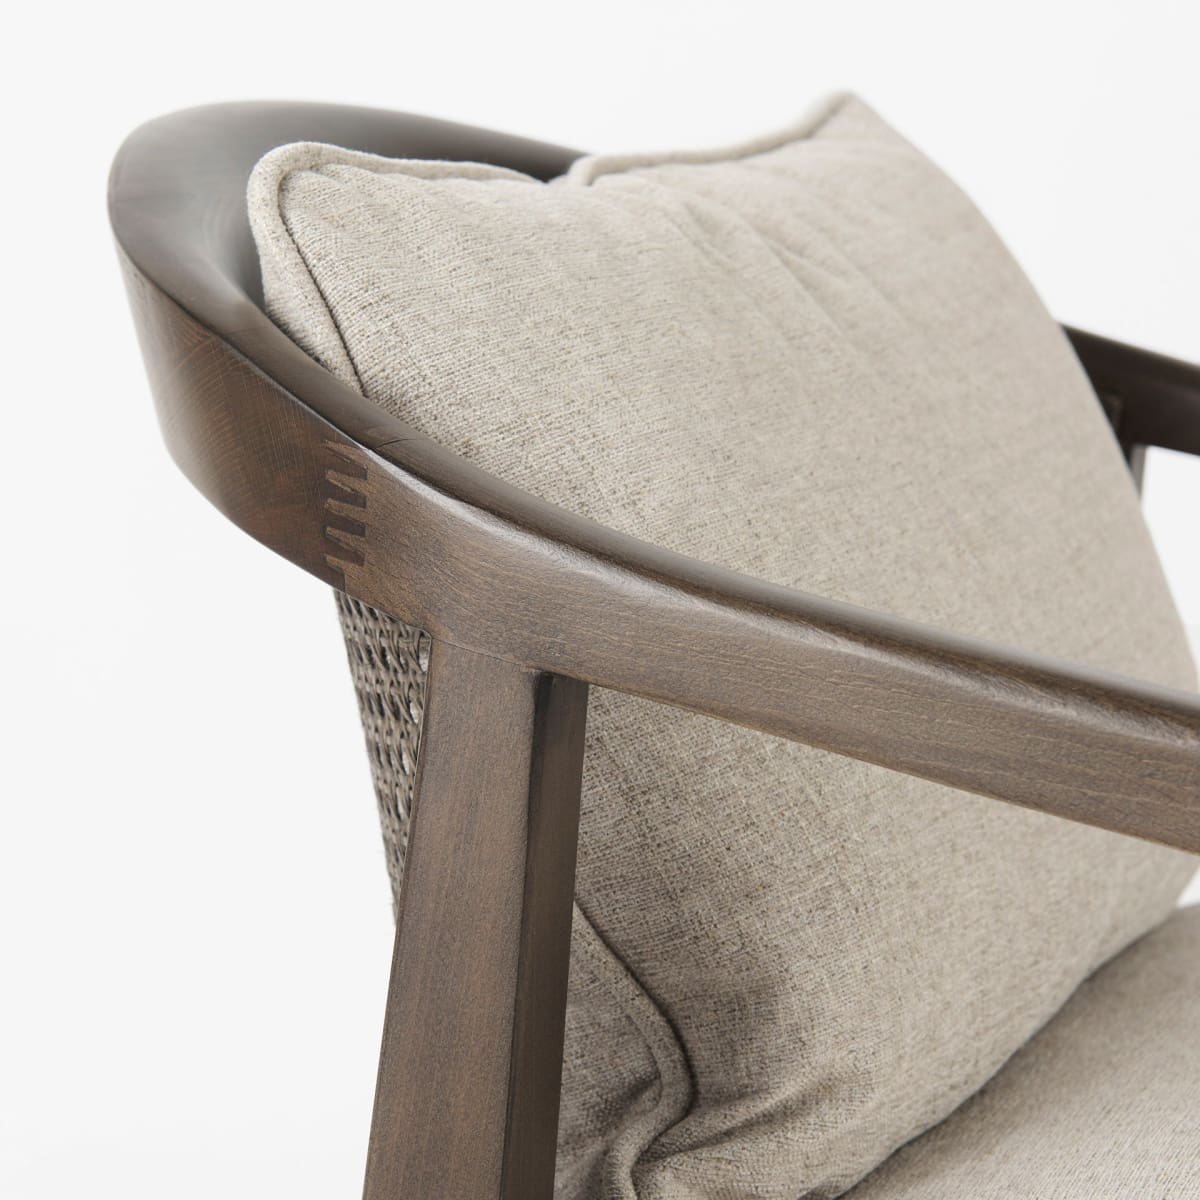 Landon Accent Chair Gray Fabric | Dark Brown Wood - accent-chairs